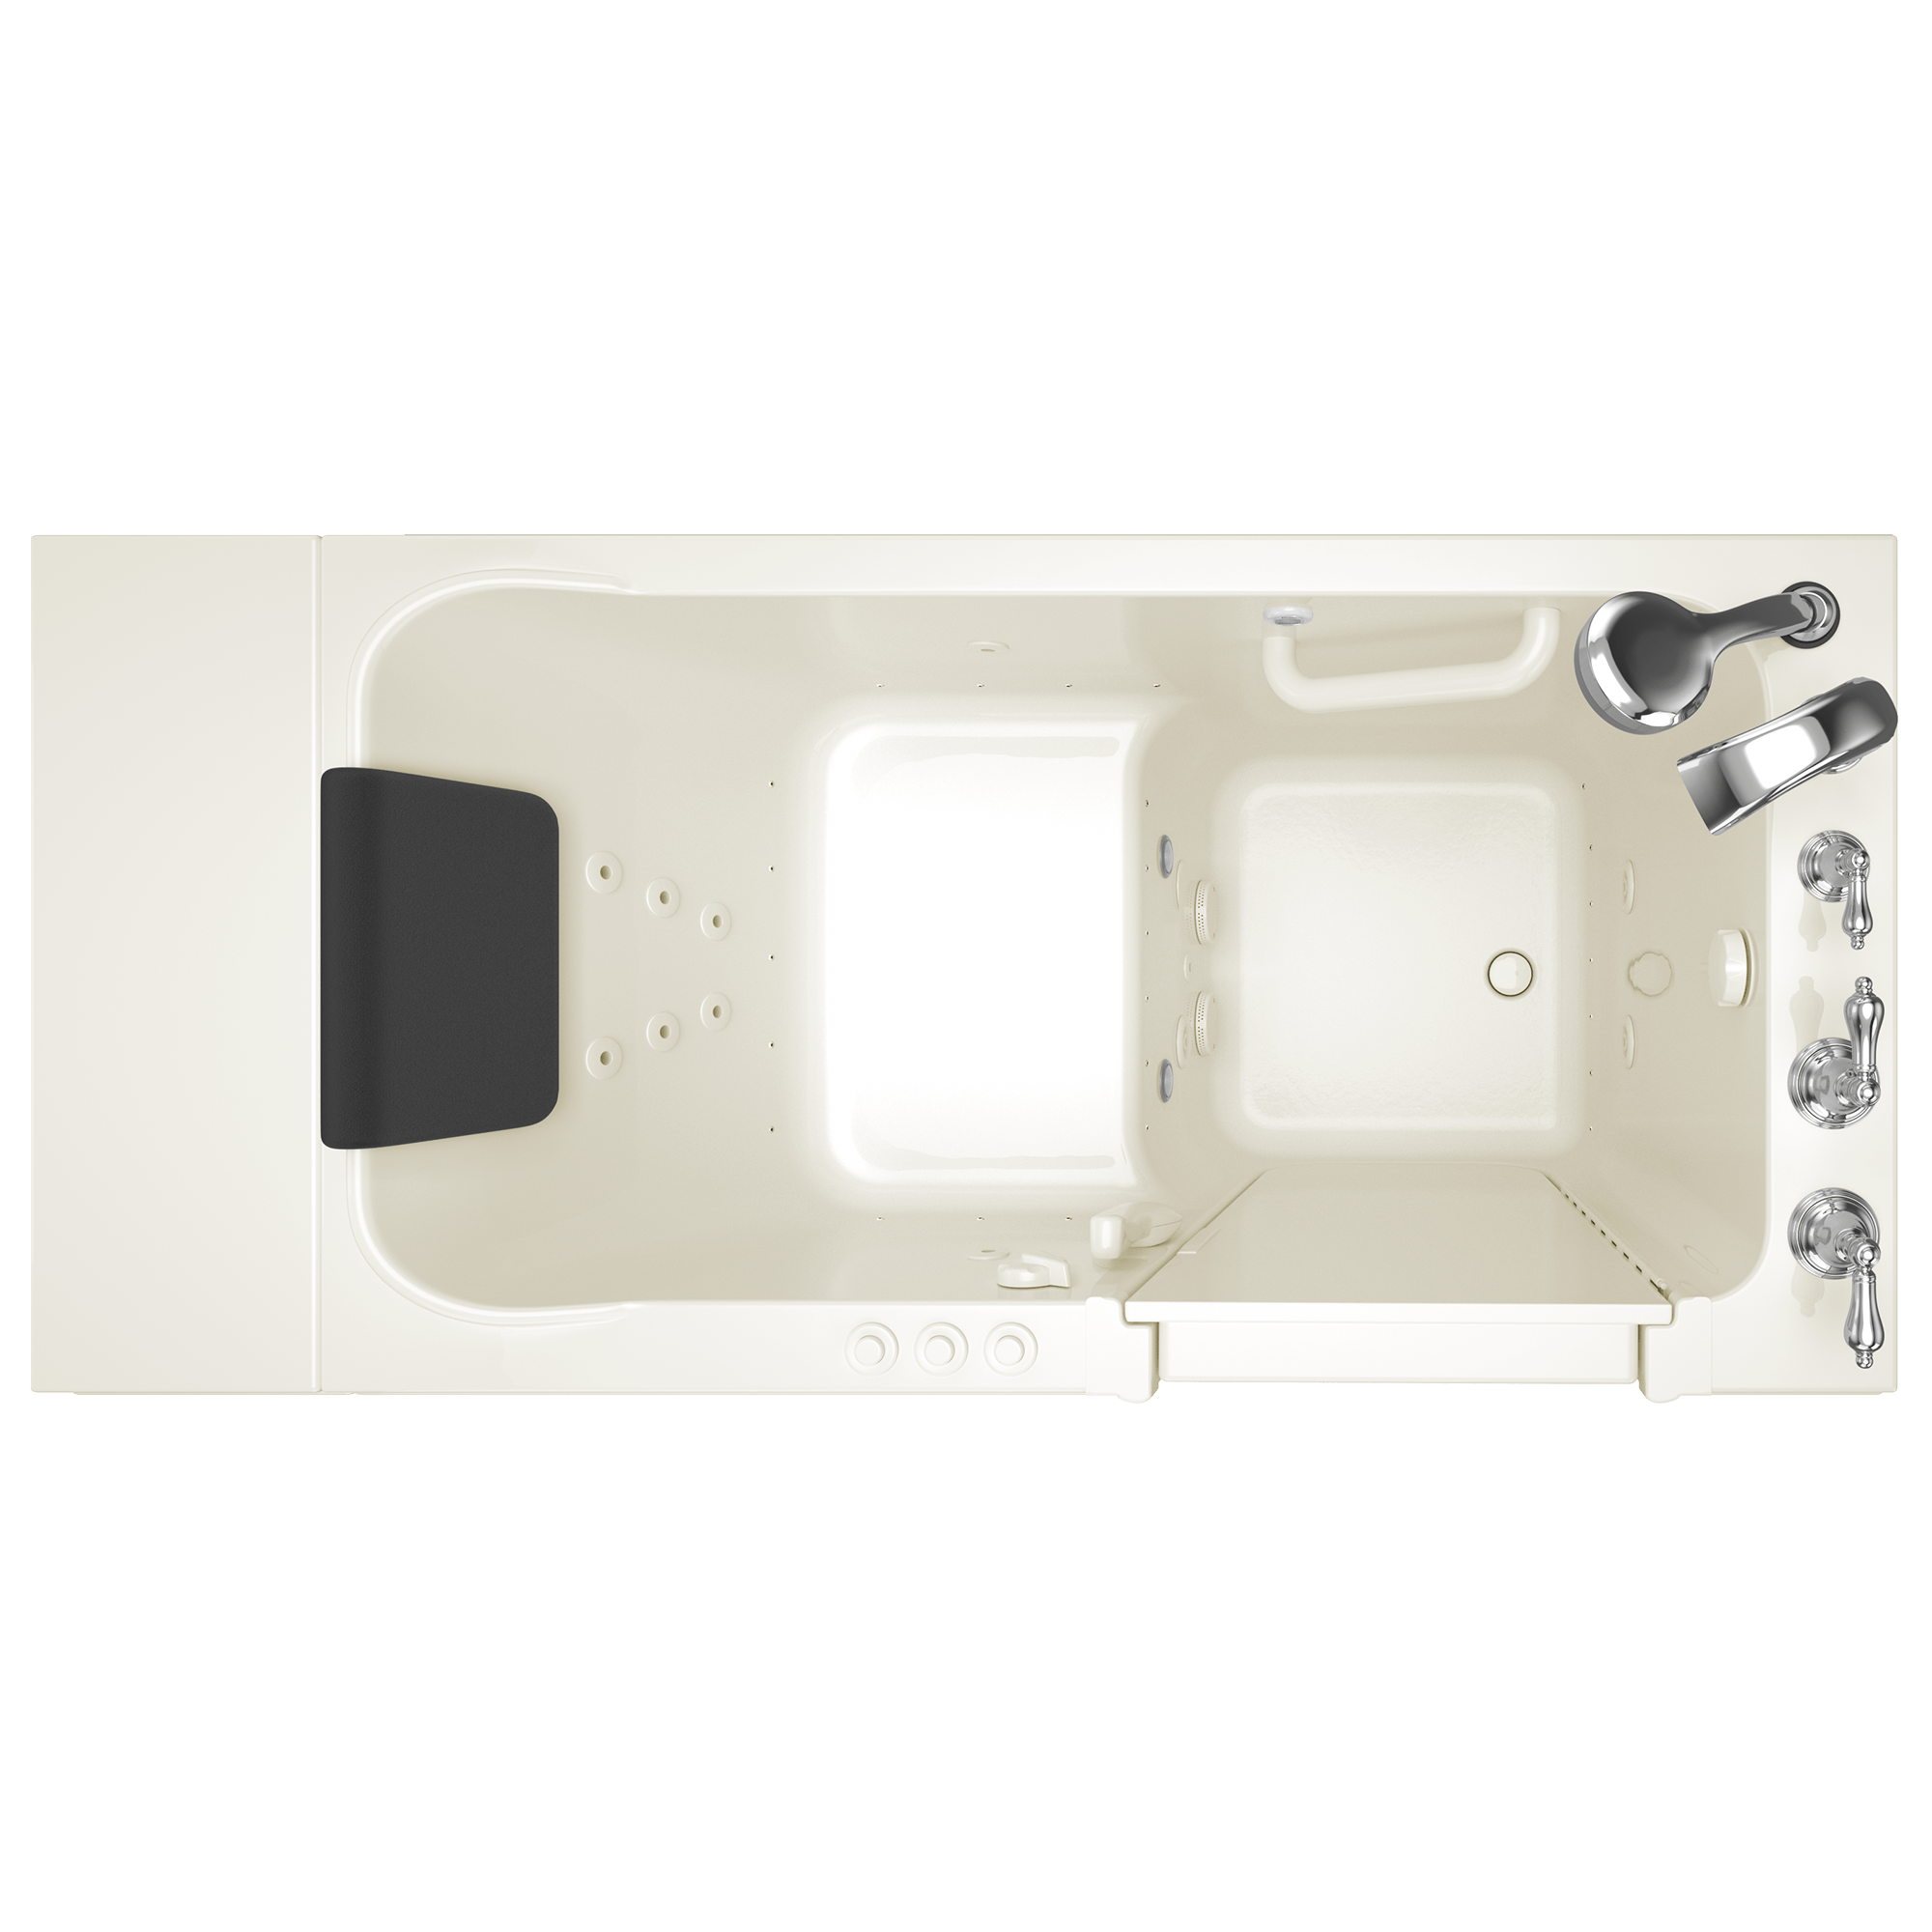 Acrylic Luxury Series 28 x 48 Inch Walk in Tub With Combination Air Spa and Whirlpool Systems   Right Hand Drain With Faucet WIB LINEN